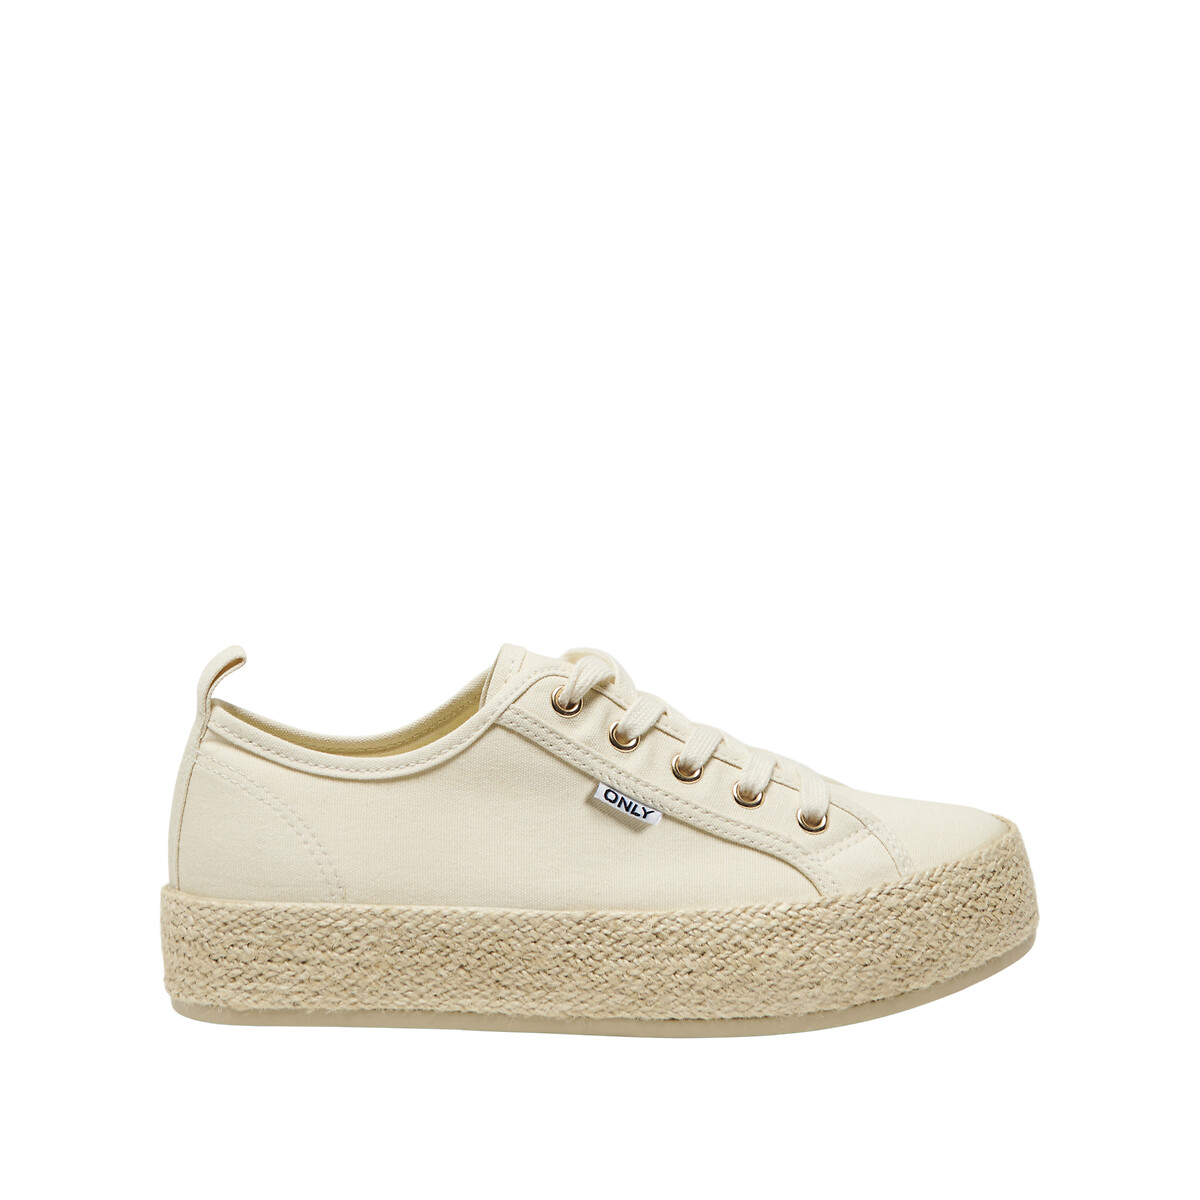 ONLY SHOES Lage sneakers, espadrille zool Lida